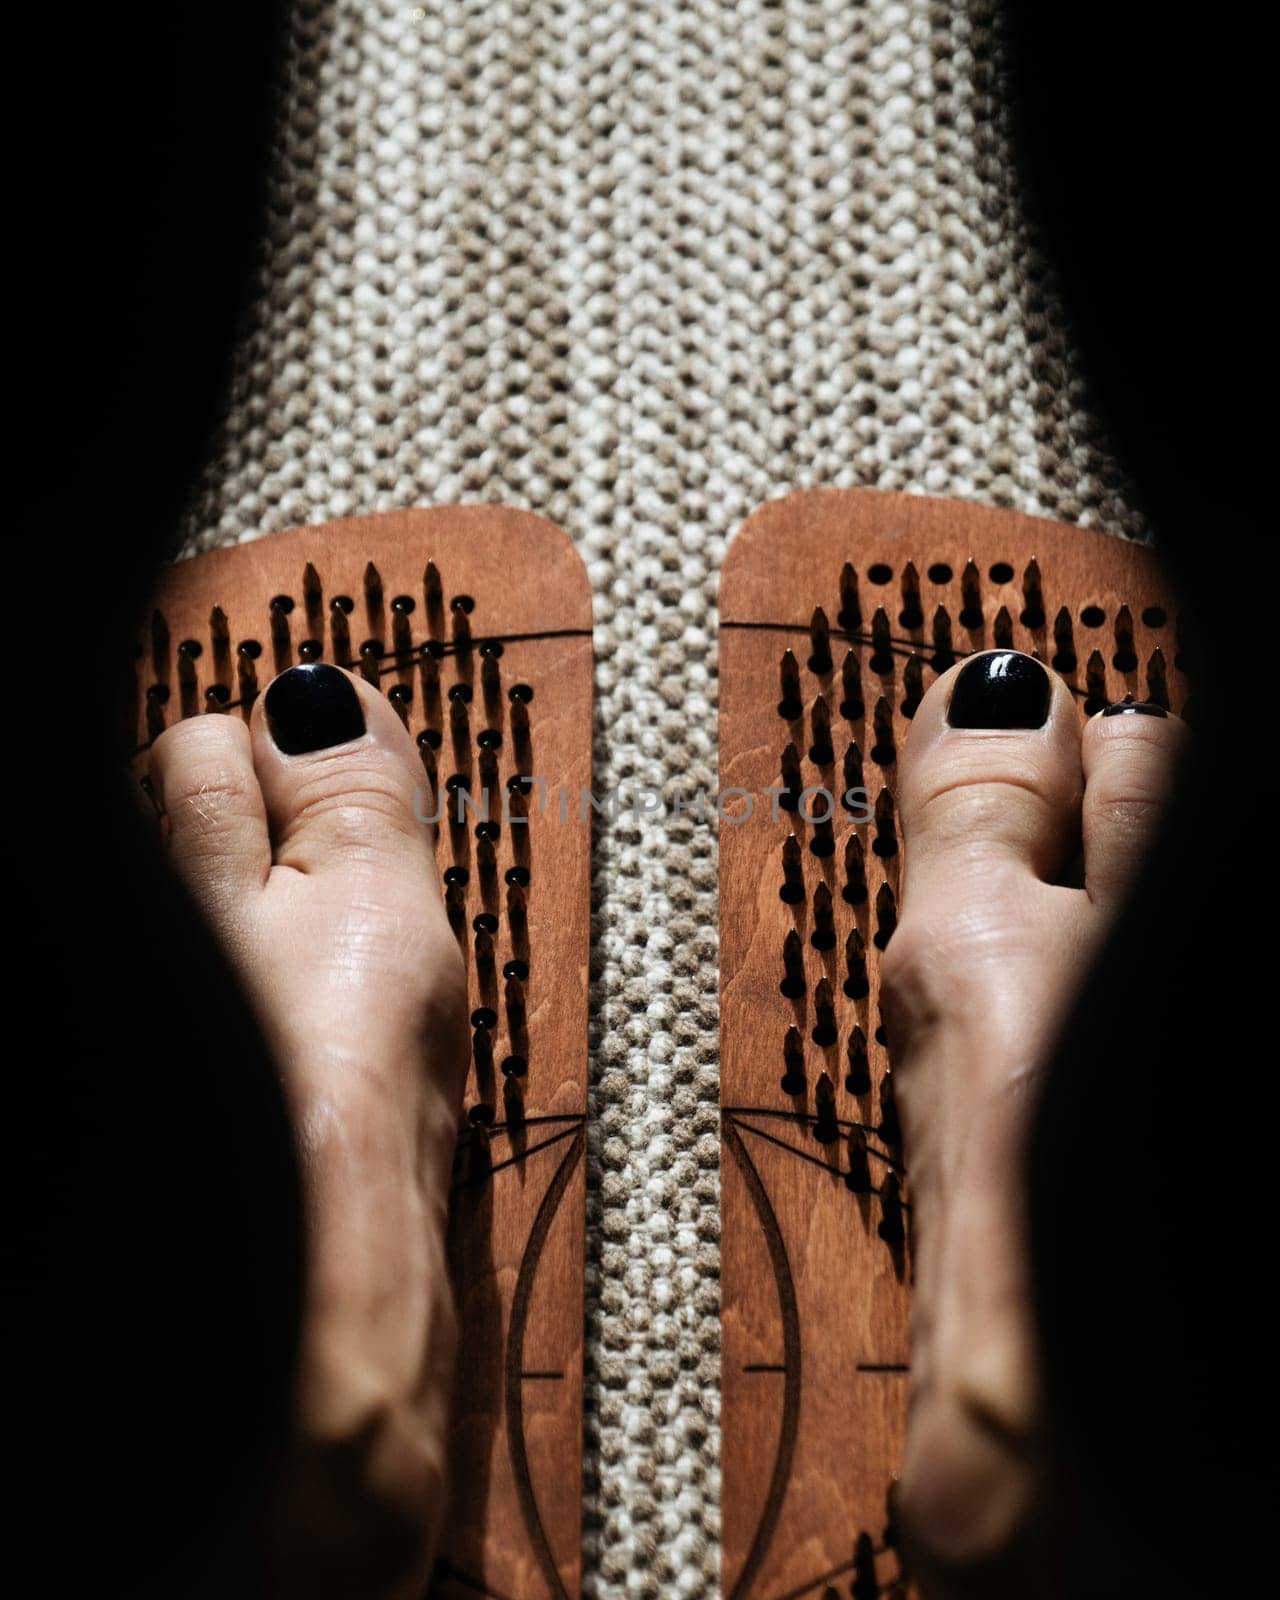 Dramatic shadows cast on a sadhu board, enhancing the tactile experience of acupressure.